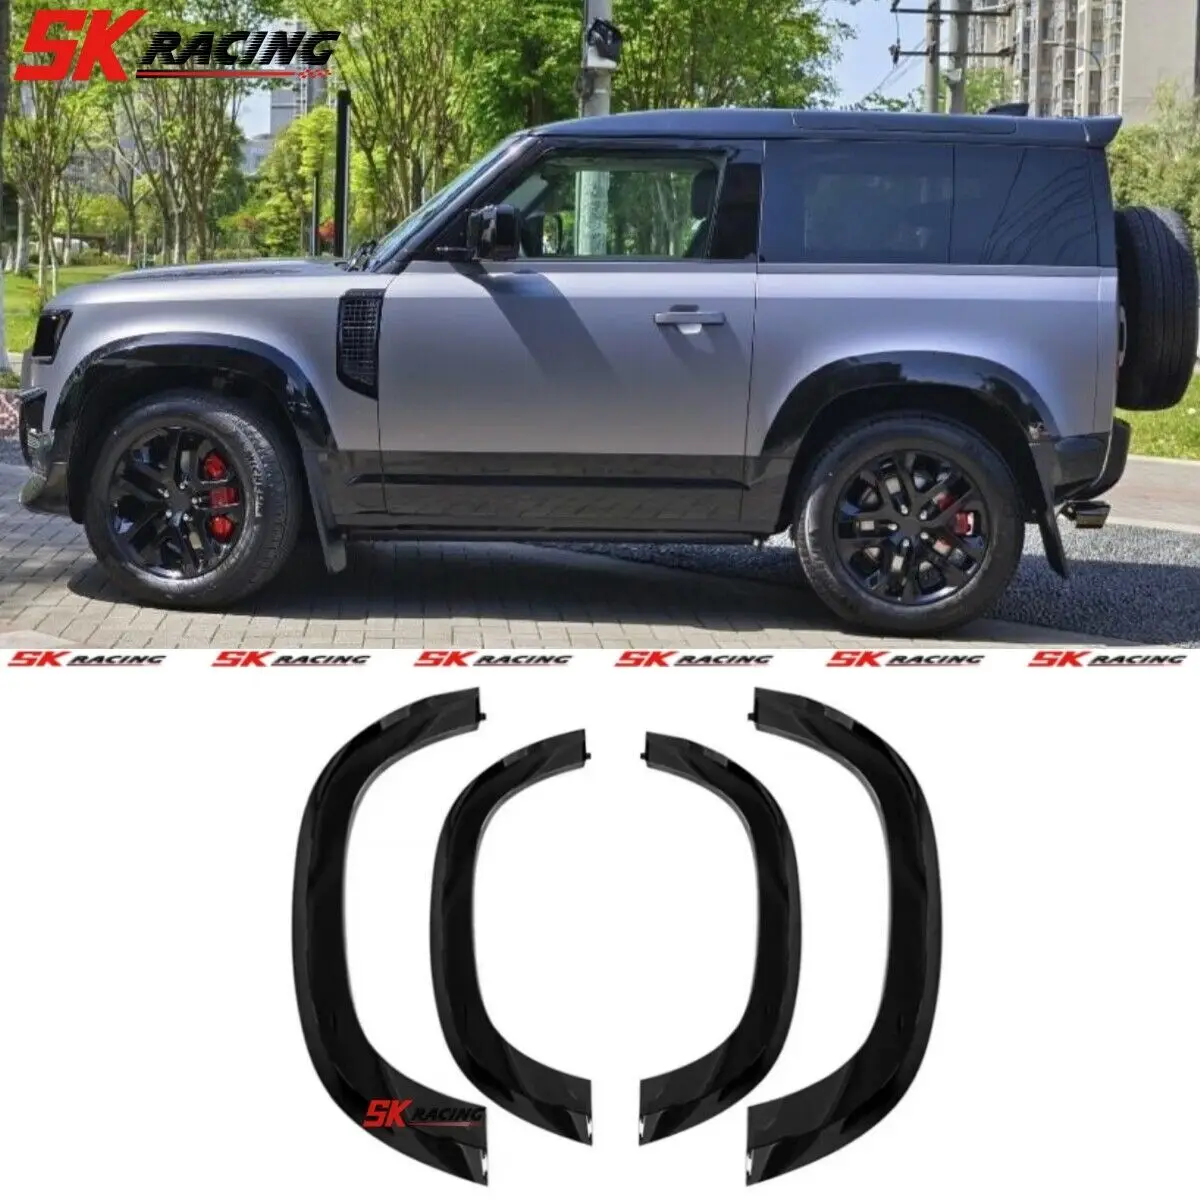 

Fits Land Rover Defender 90 L663 Fender Flares Wheel Arch Trim Wide Body Kits Car Accessories